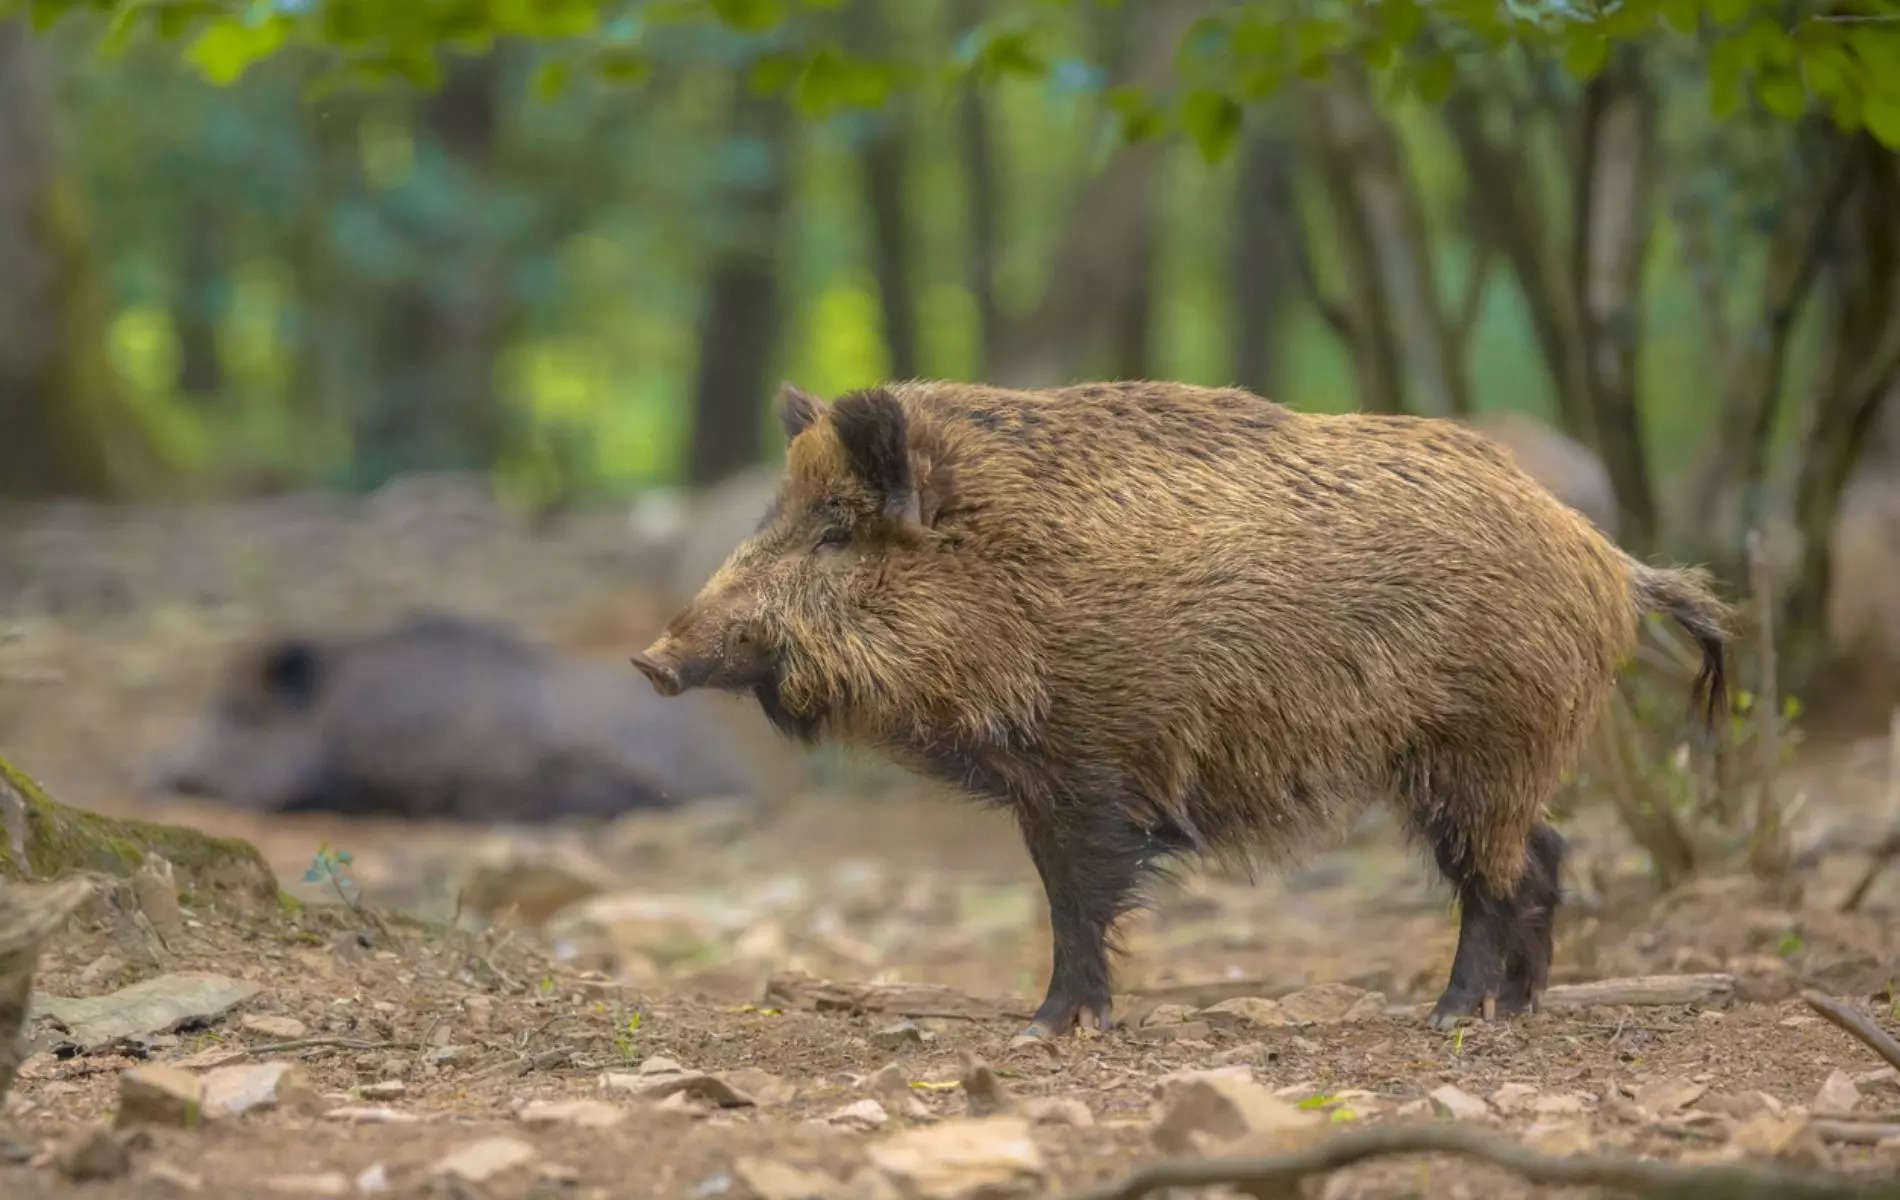 The hog was named after Vladimir Putin due to his Russian genetic heritage